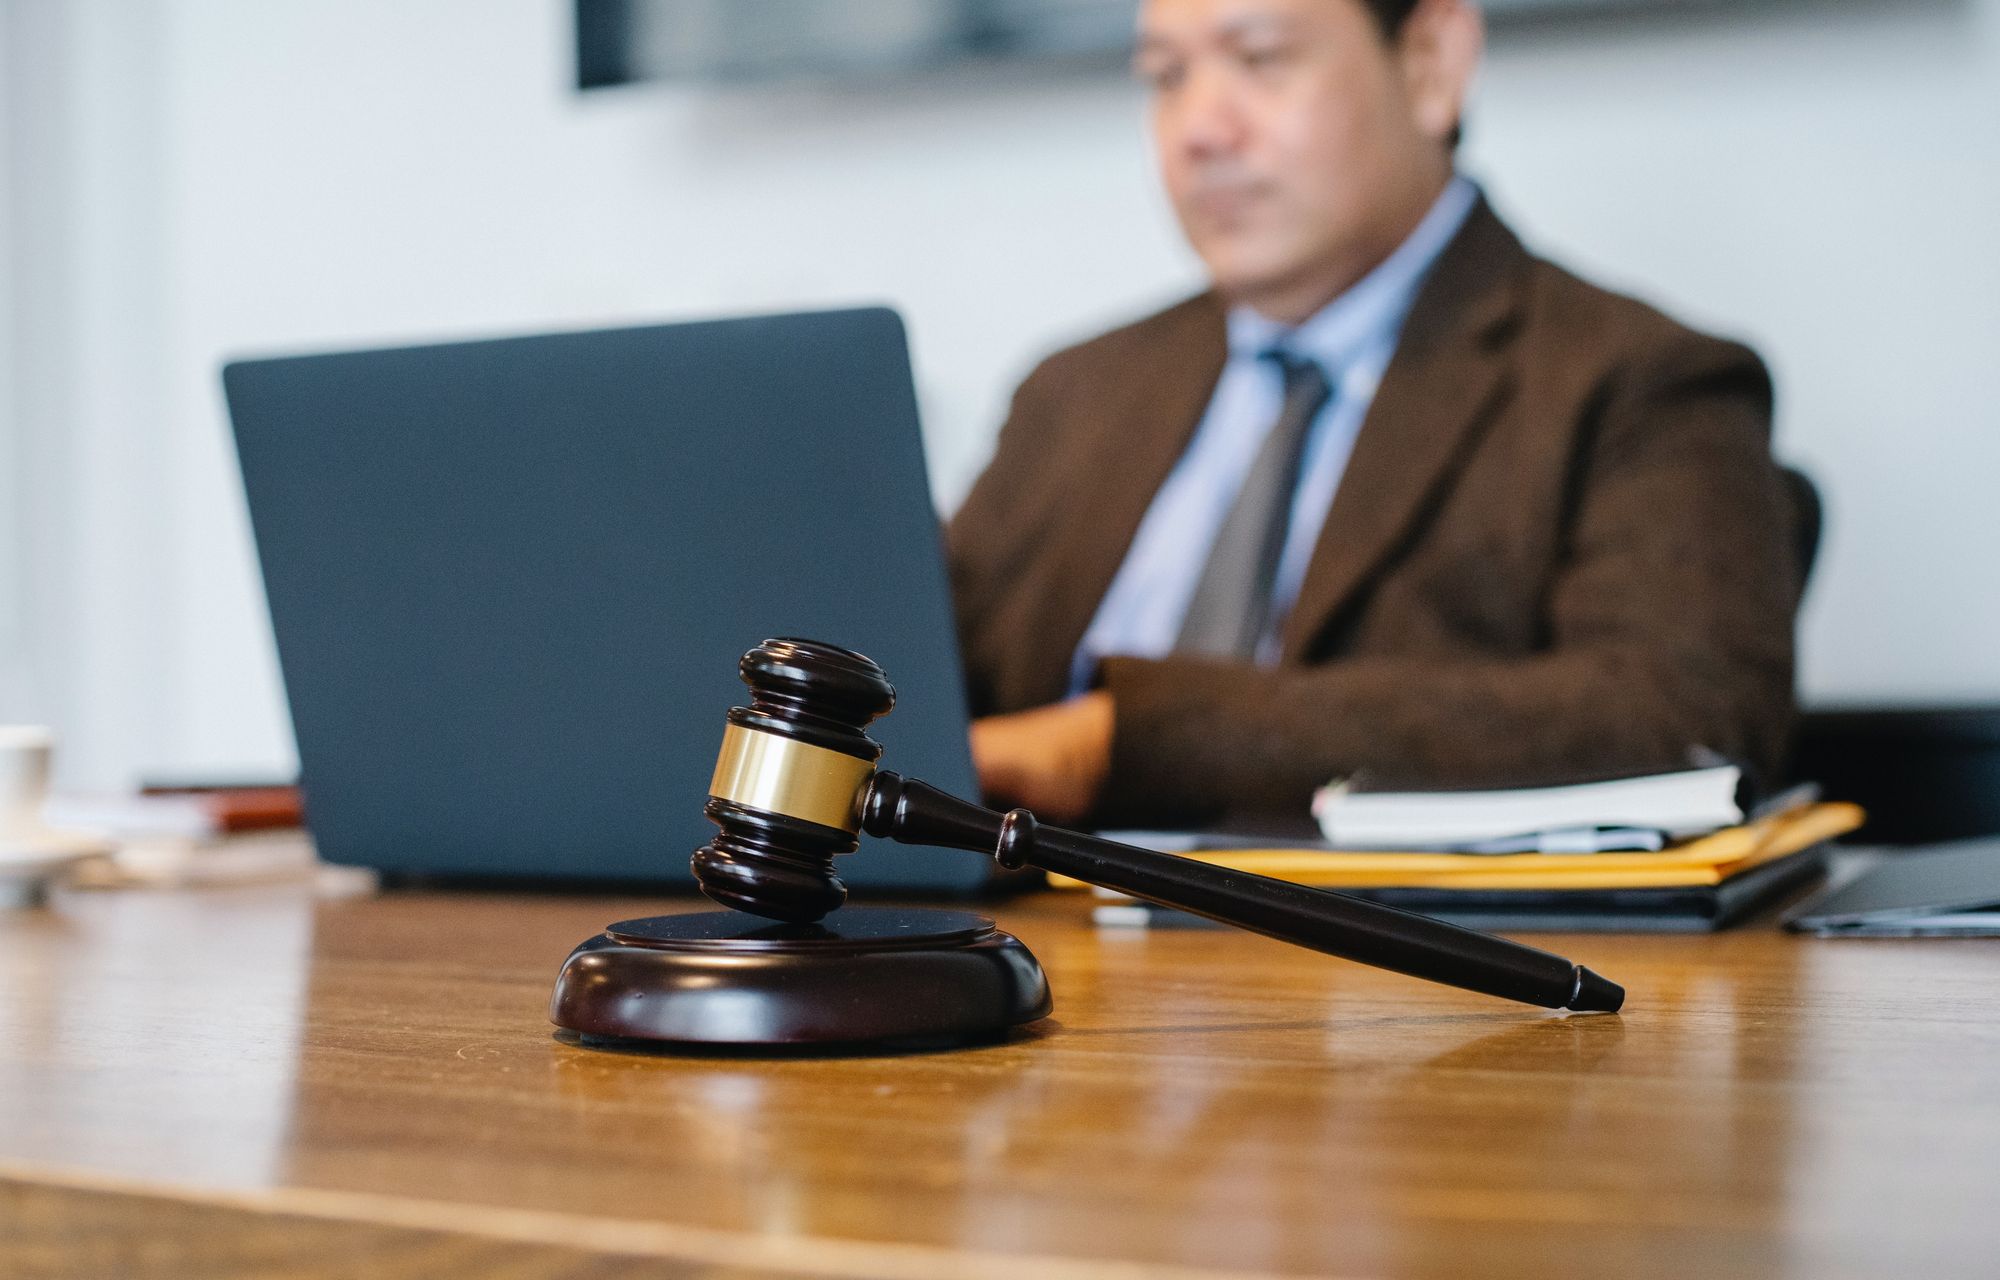 Man sitting infront of a laptop, with a gavel in front of him